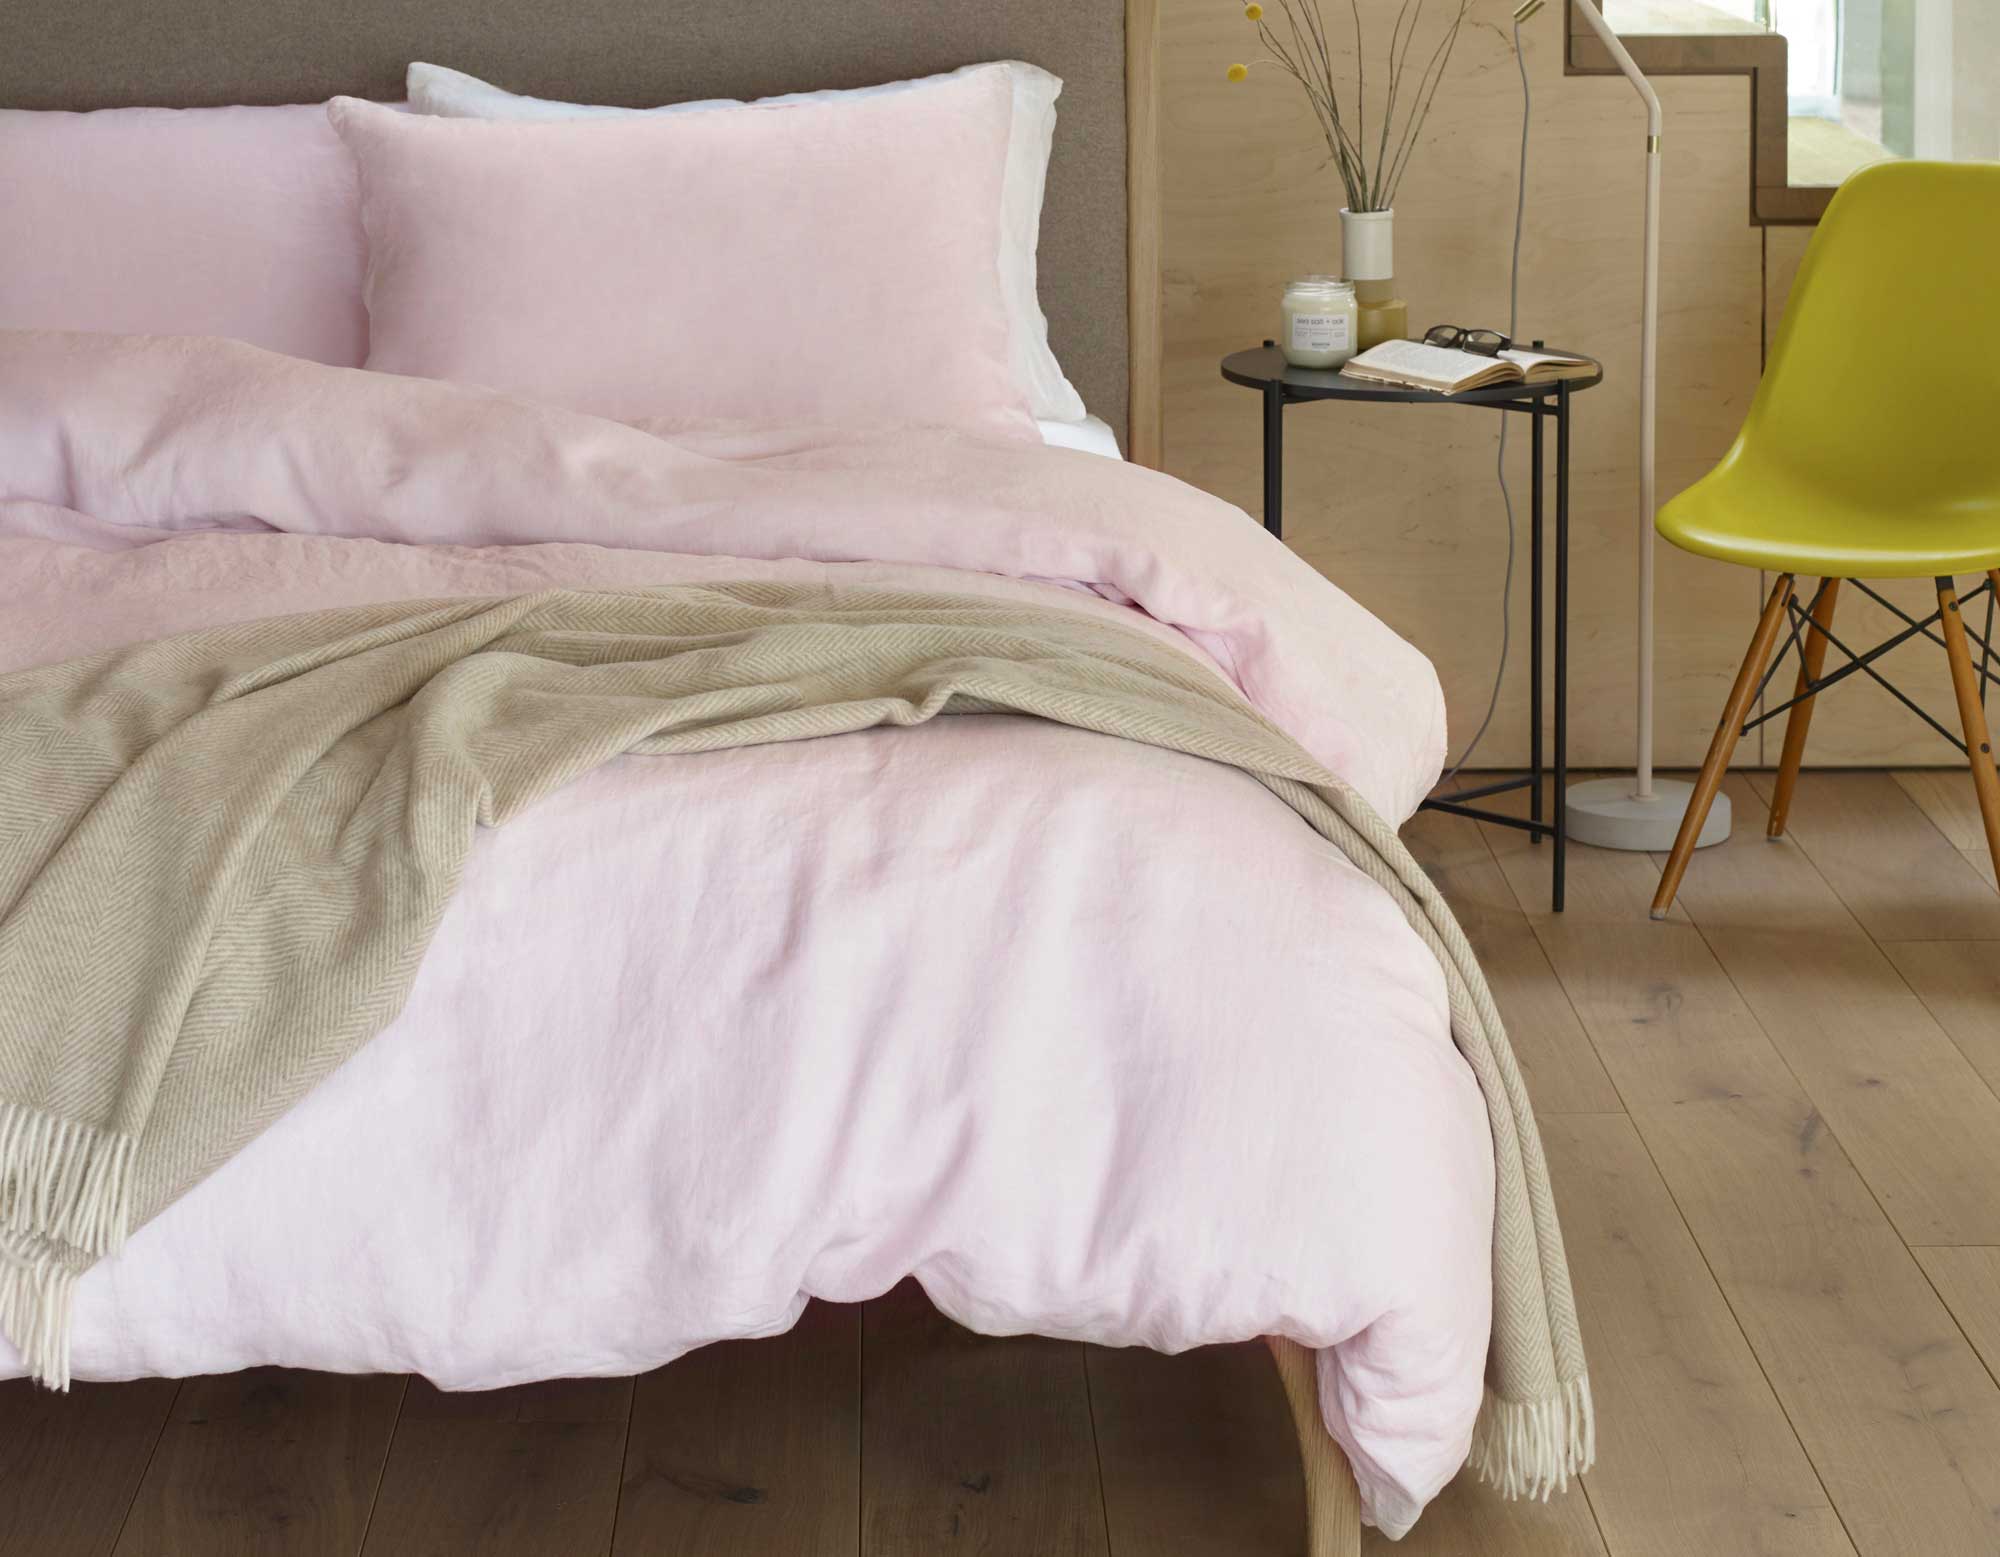 Pink linen pillowcases and duvet cover on bed in modern bedroom 